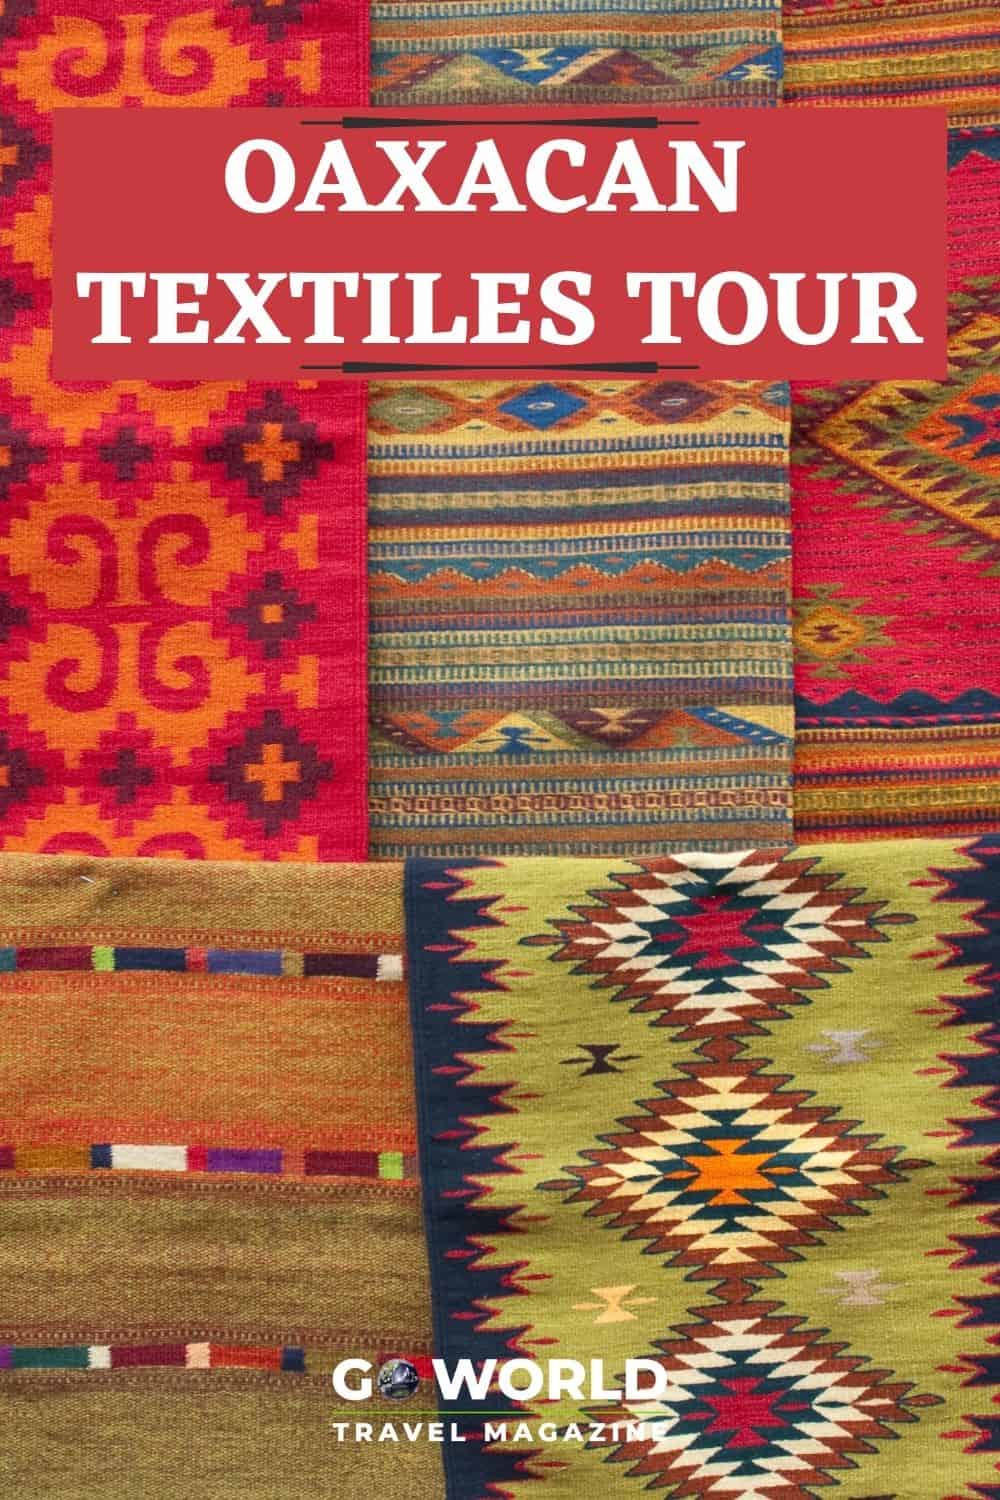 Get to know Oaxaca, Mexico and its colorful traditions with a tour of the Oaxacan textile craft and the artisans who create them. #Oaxaca #Oaxacantextiles